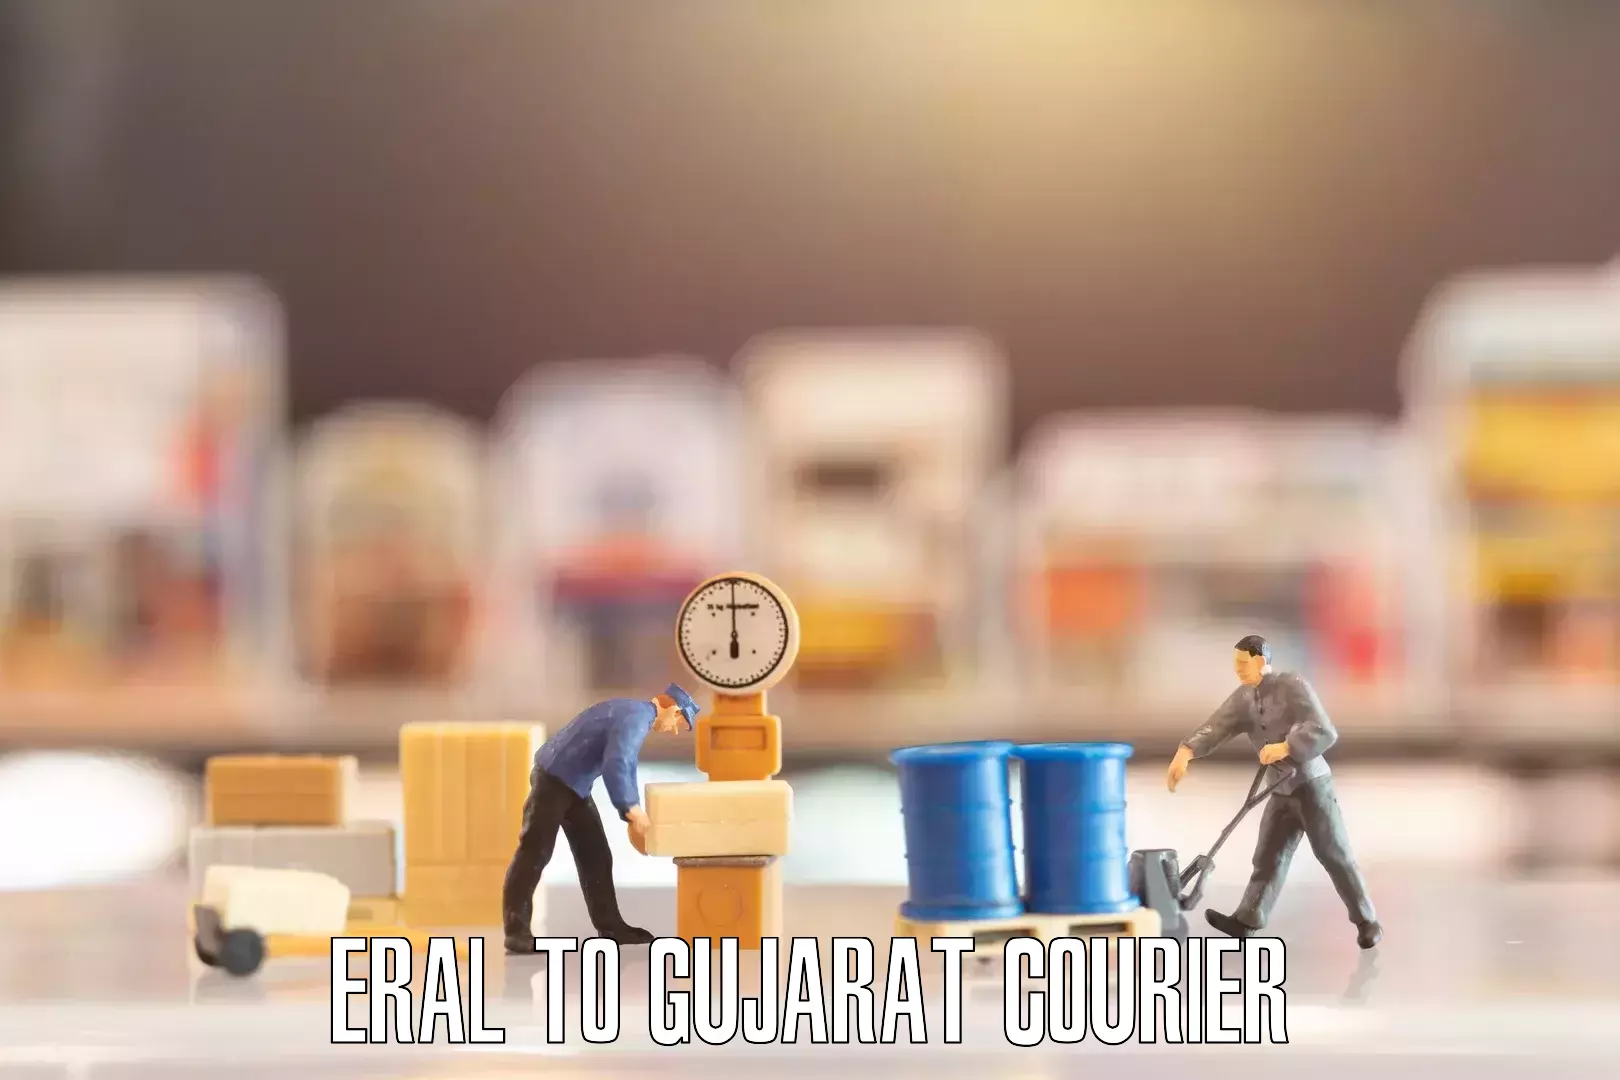 Furniture delivery service Eral to Gujarat